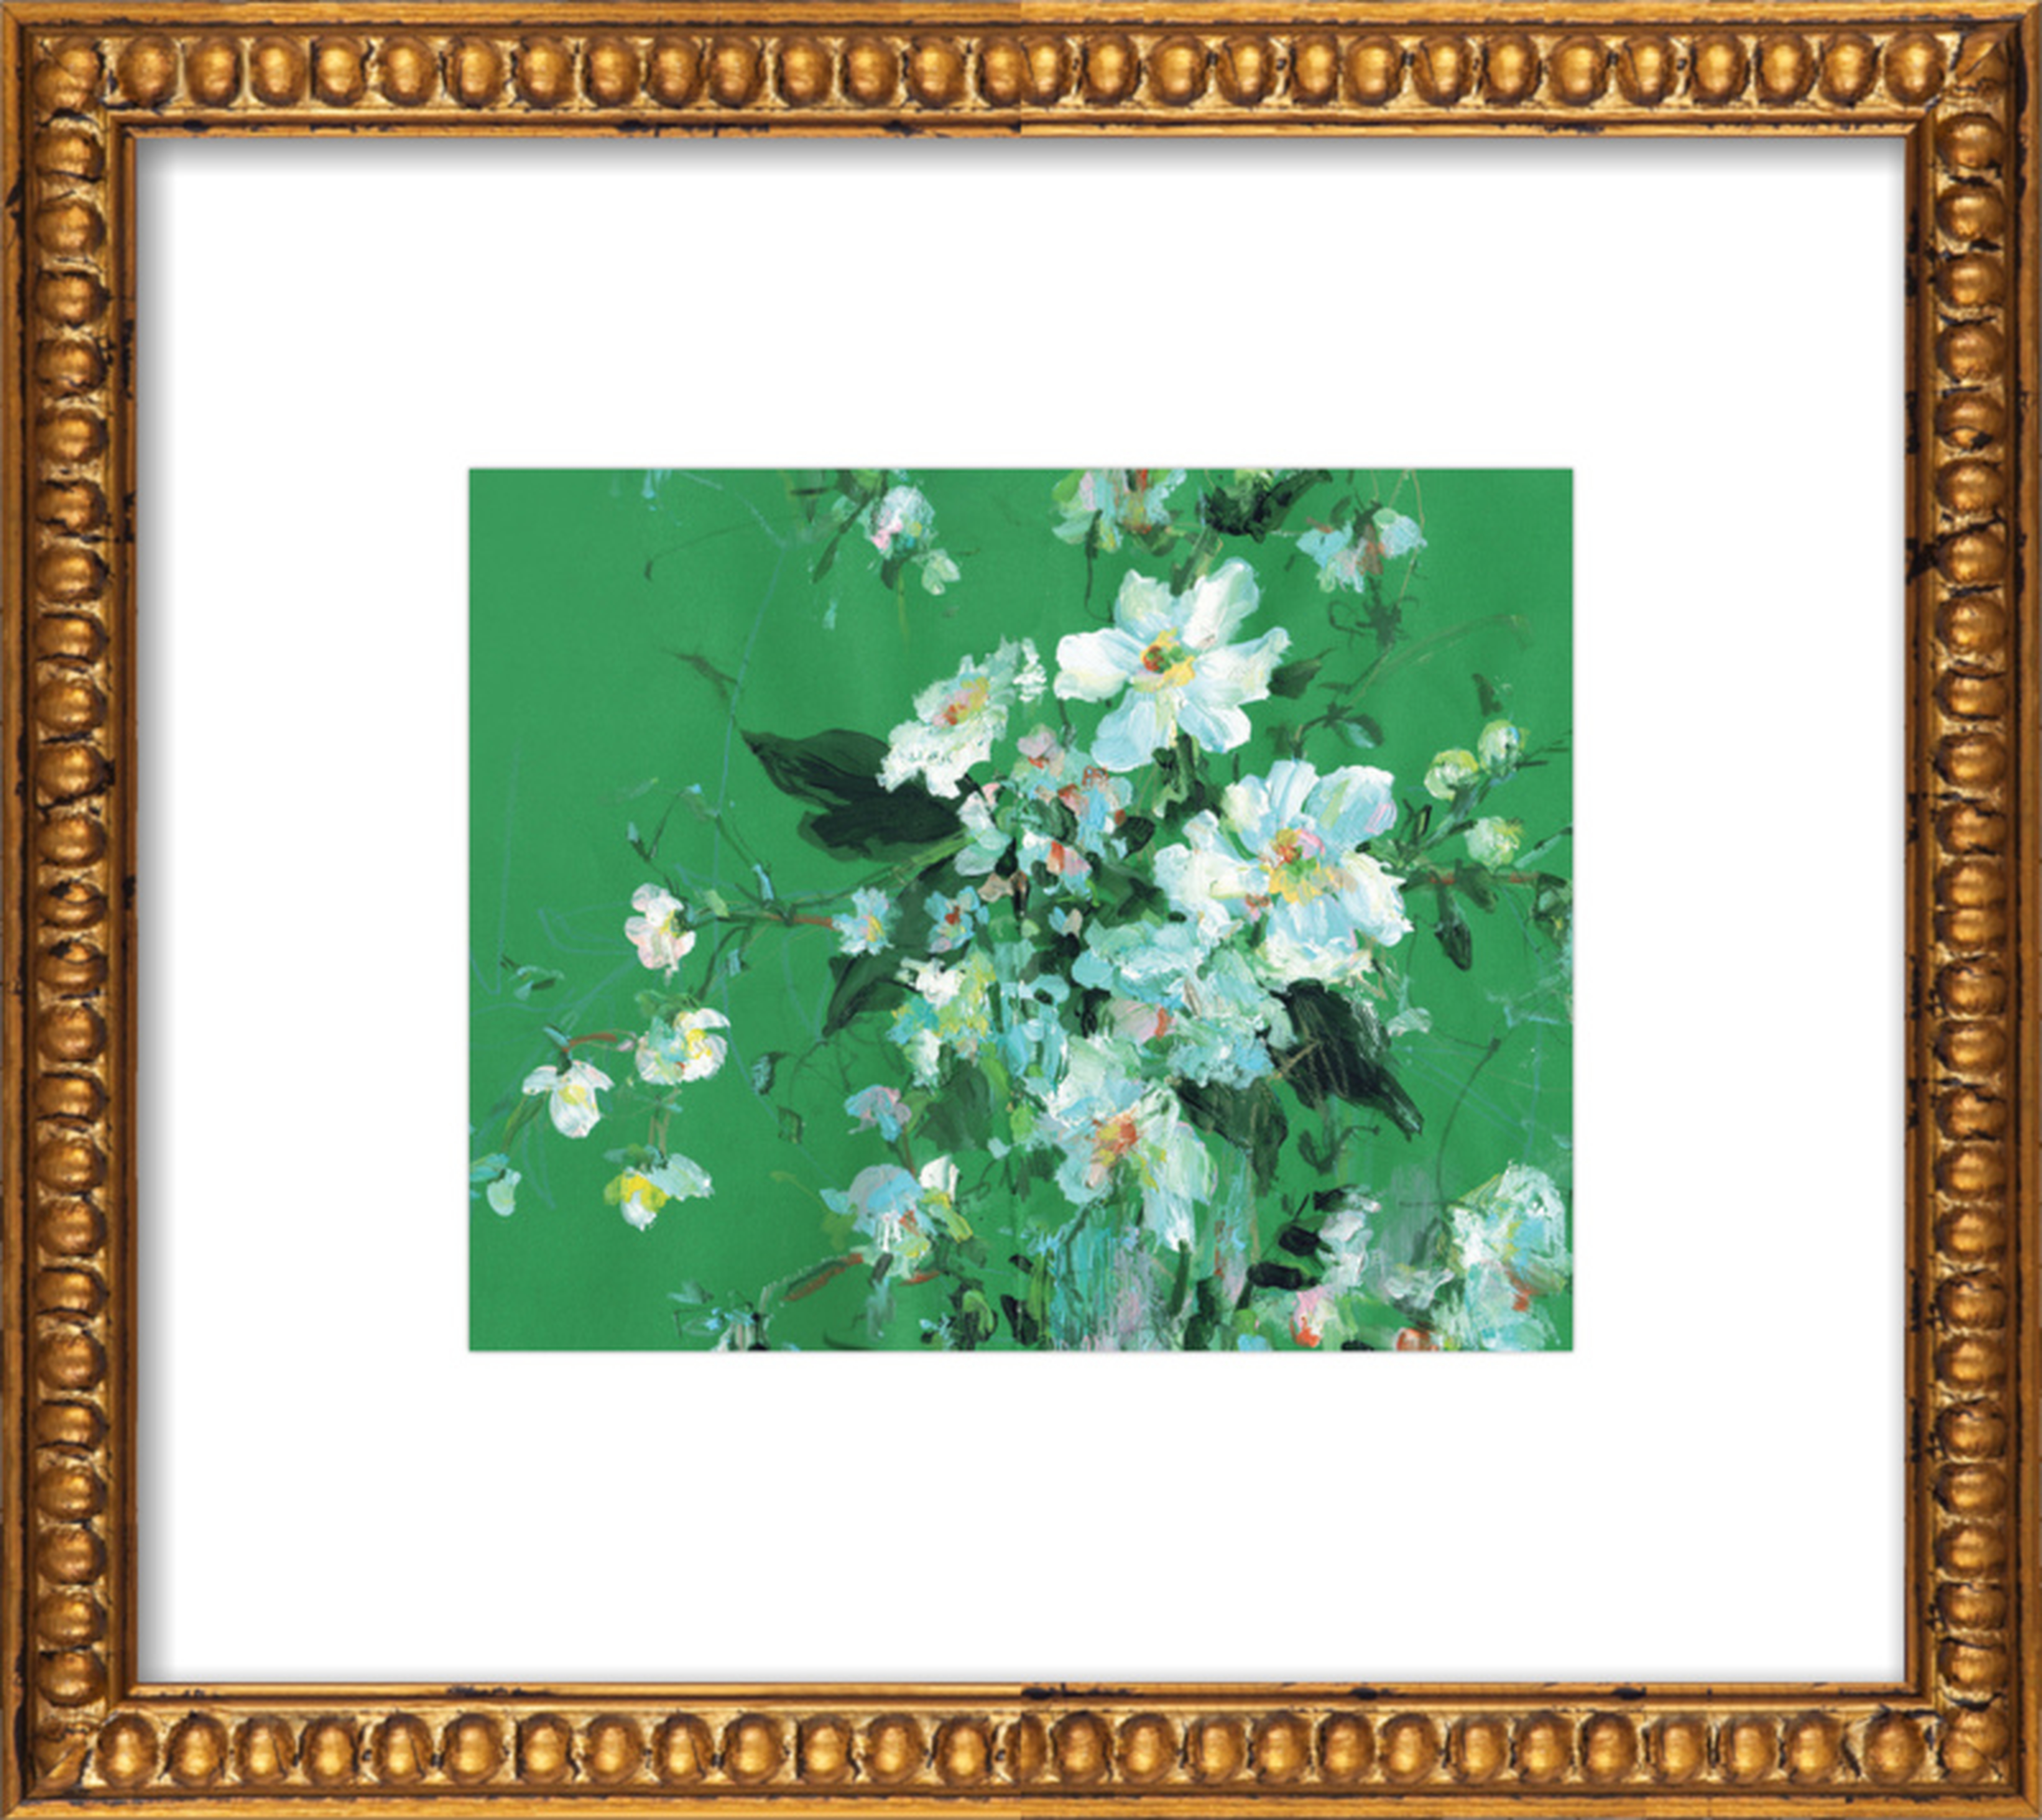 Arrangement in Green and White - 10" x 12" - Ornate Gold Crackle Bead Wood Frame - With Matte - Artfully Walls